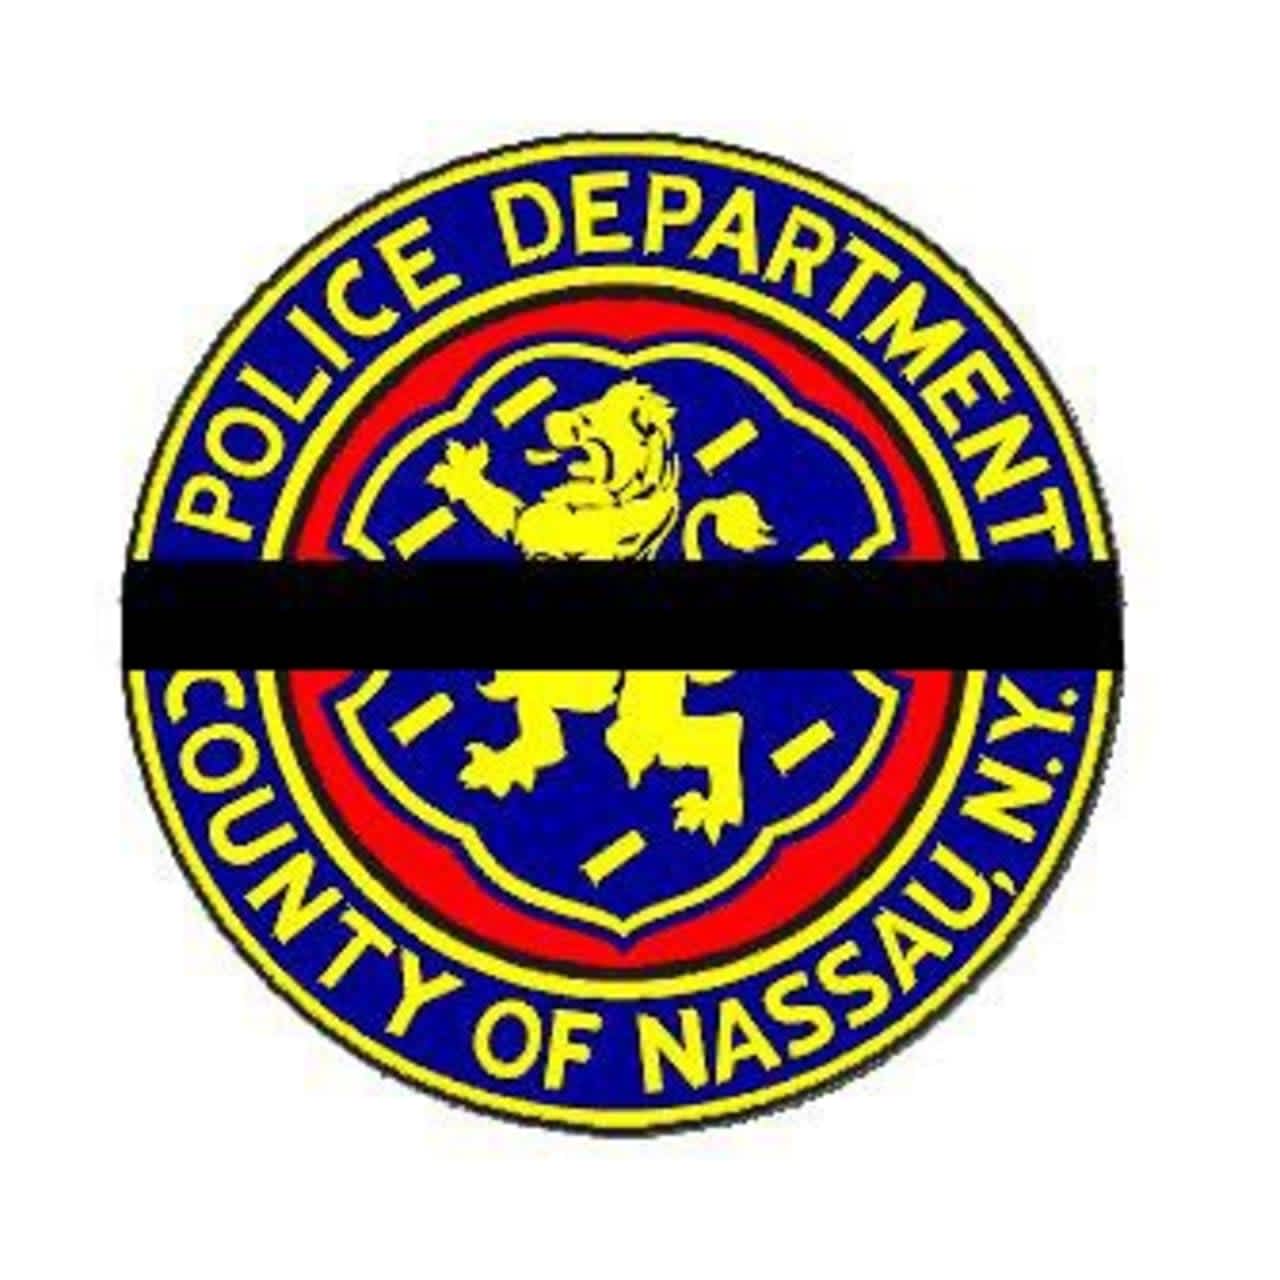 The Nassau County Police Department announced that one of their officers had died unexpectedly.